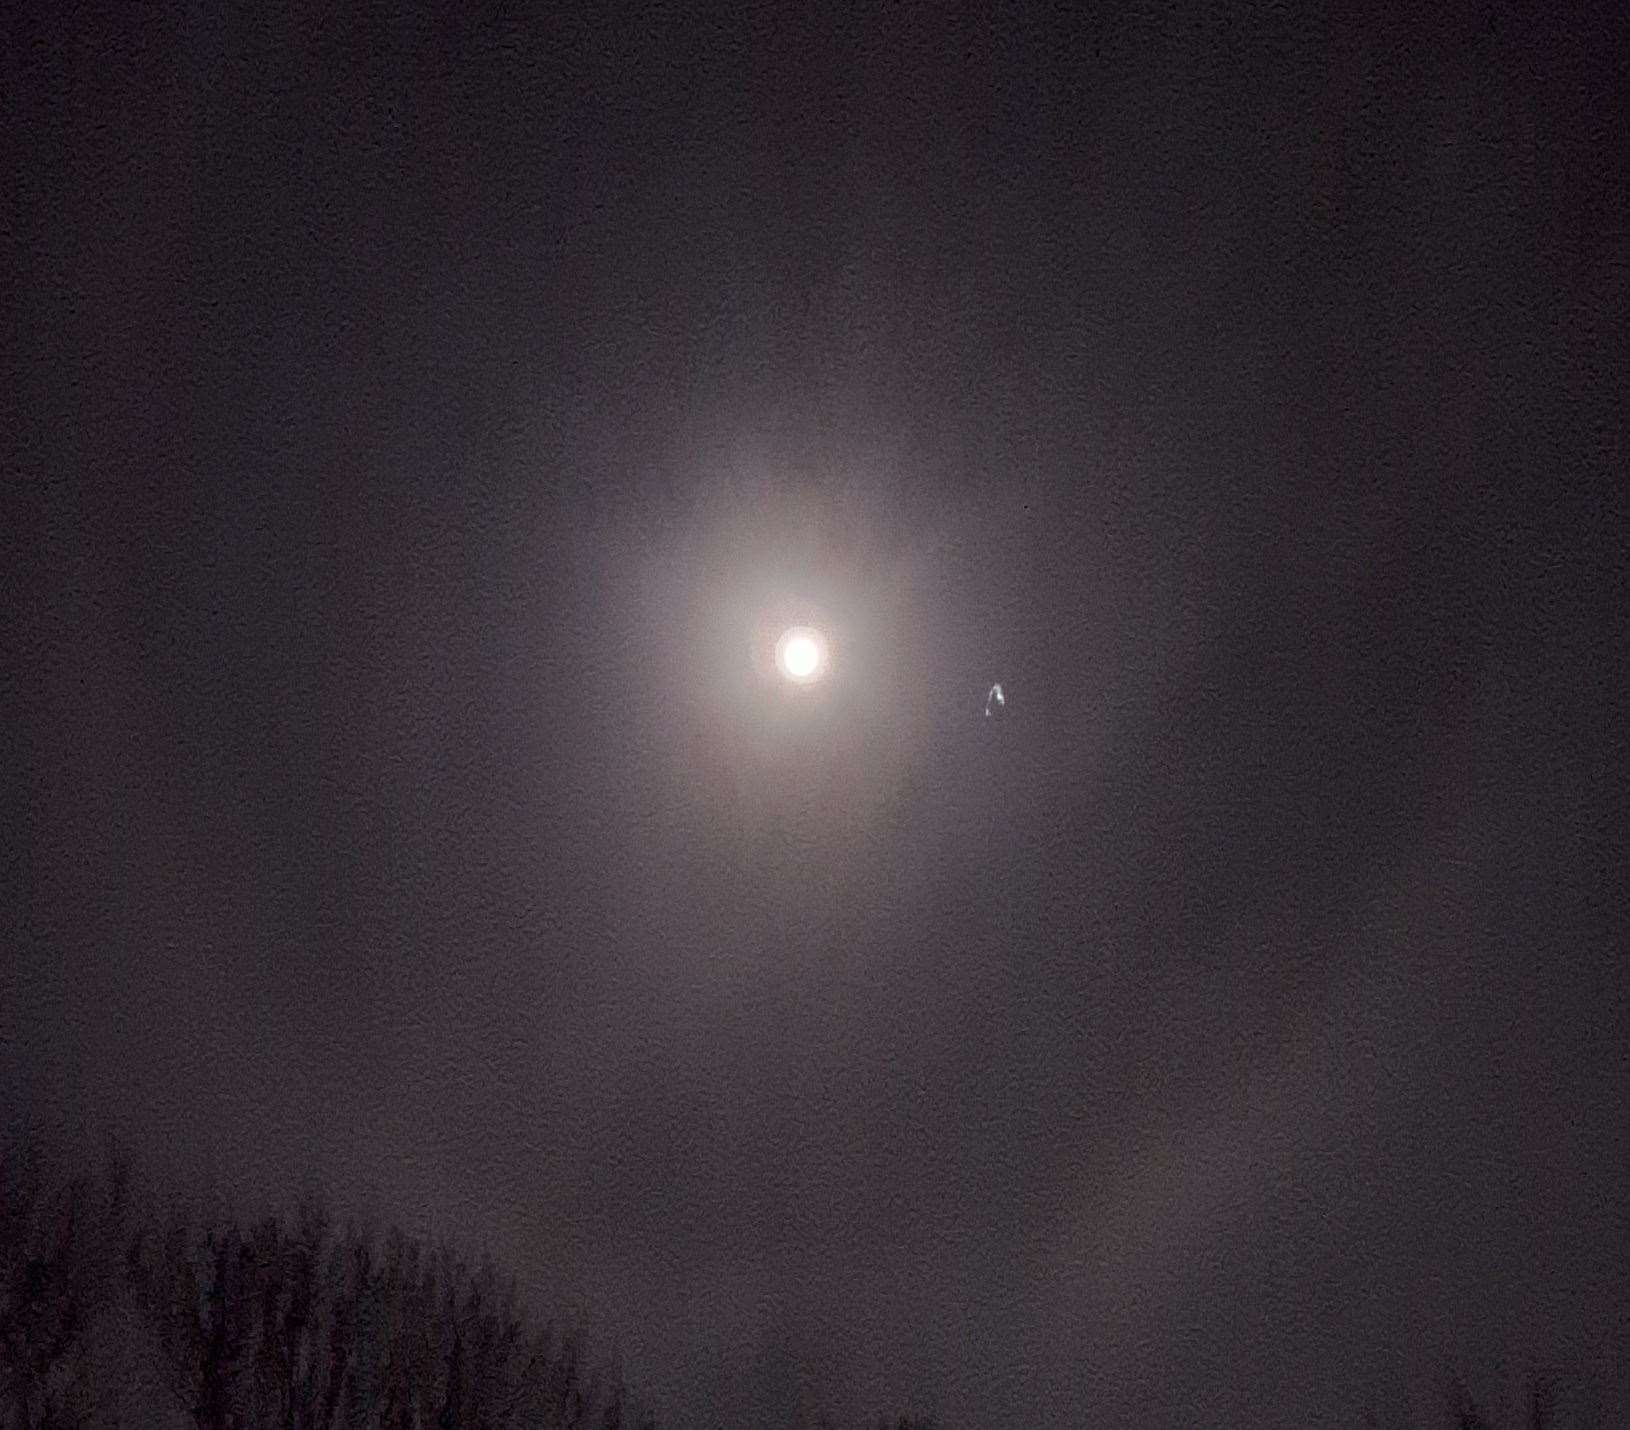 A "lunar halo" was spotted over West Malling last night. Picture: Nikki White